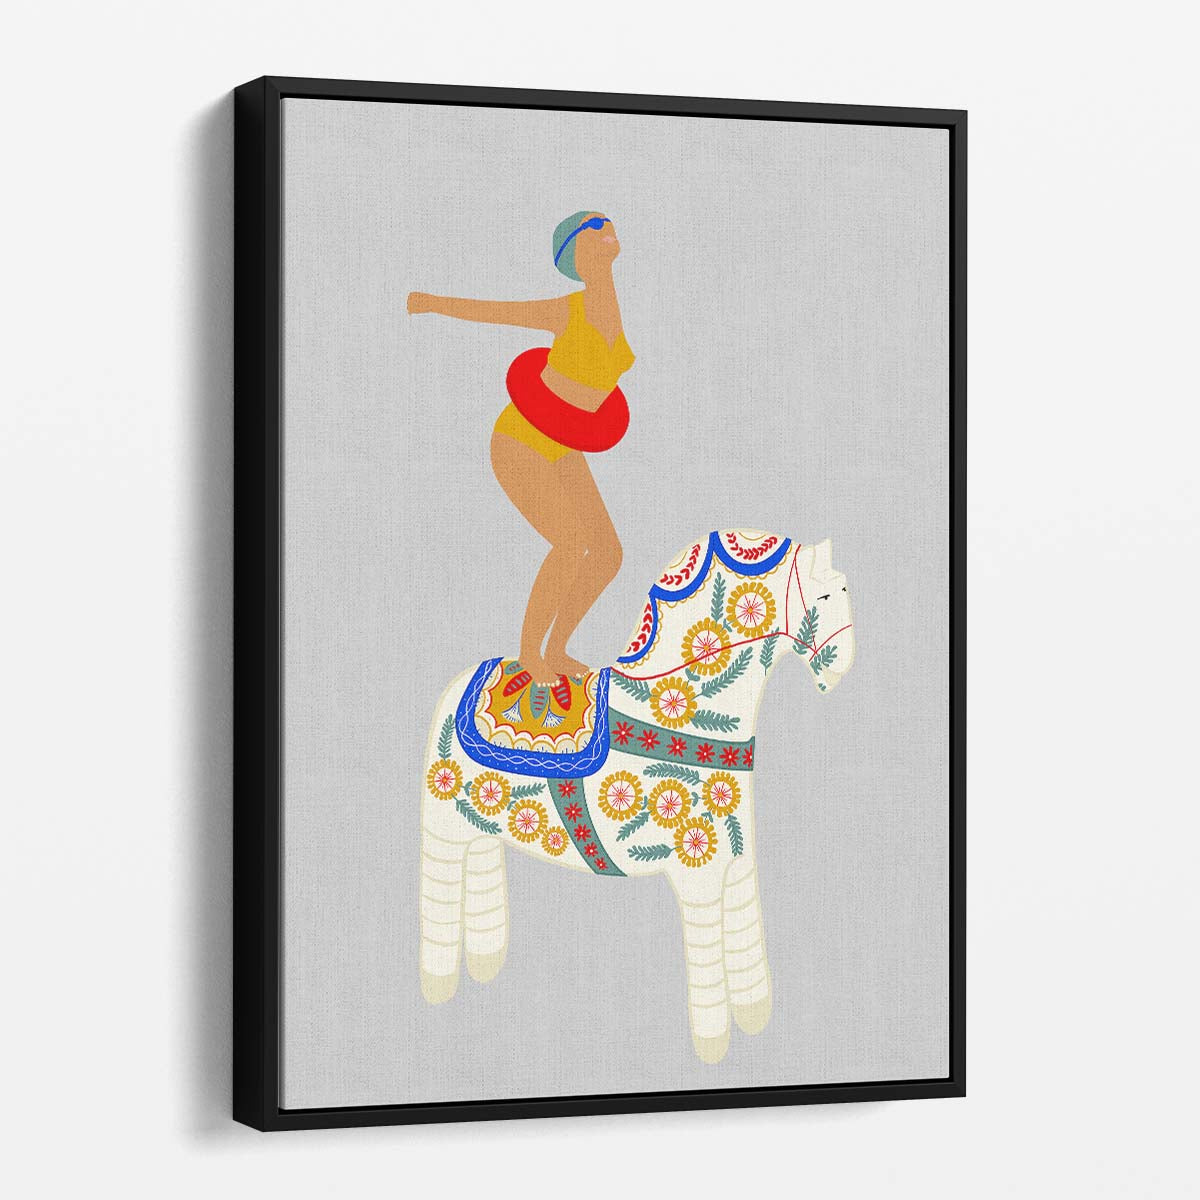 Surreal Equestrian Swimming Illustration Wall Art by Jota de Jai by Luxuriance Designs, made in USA